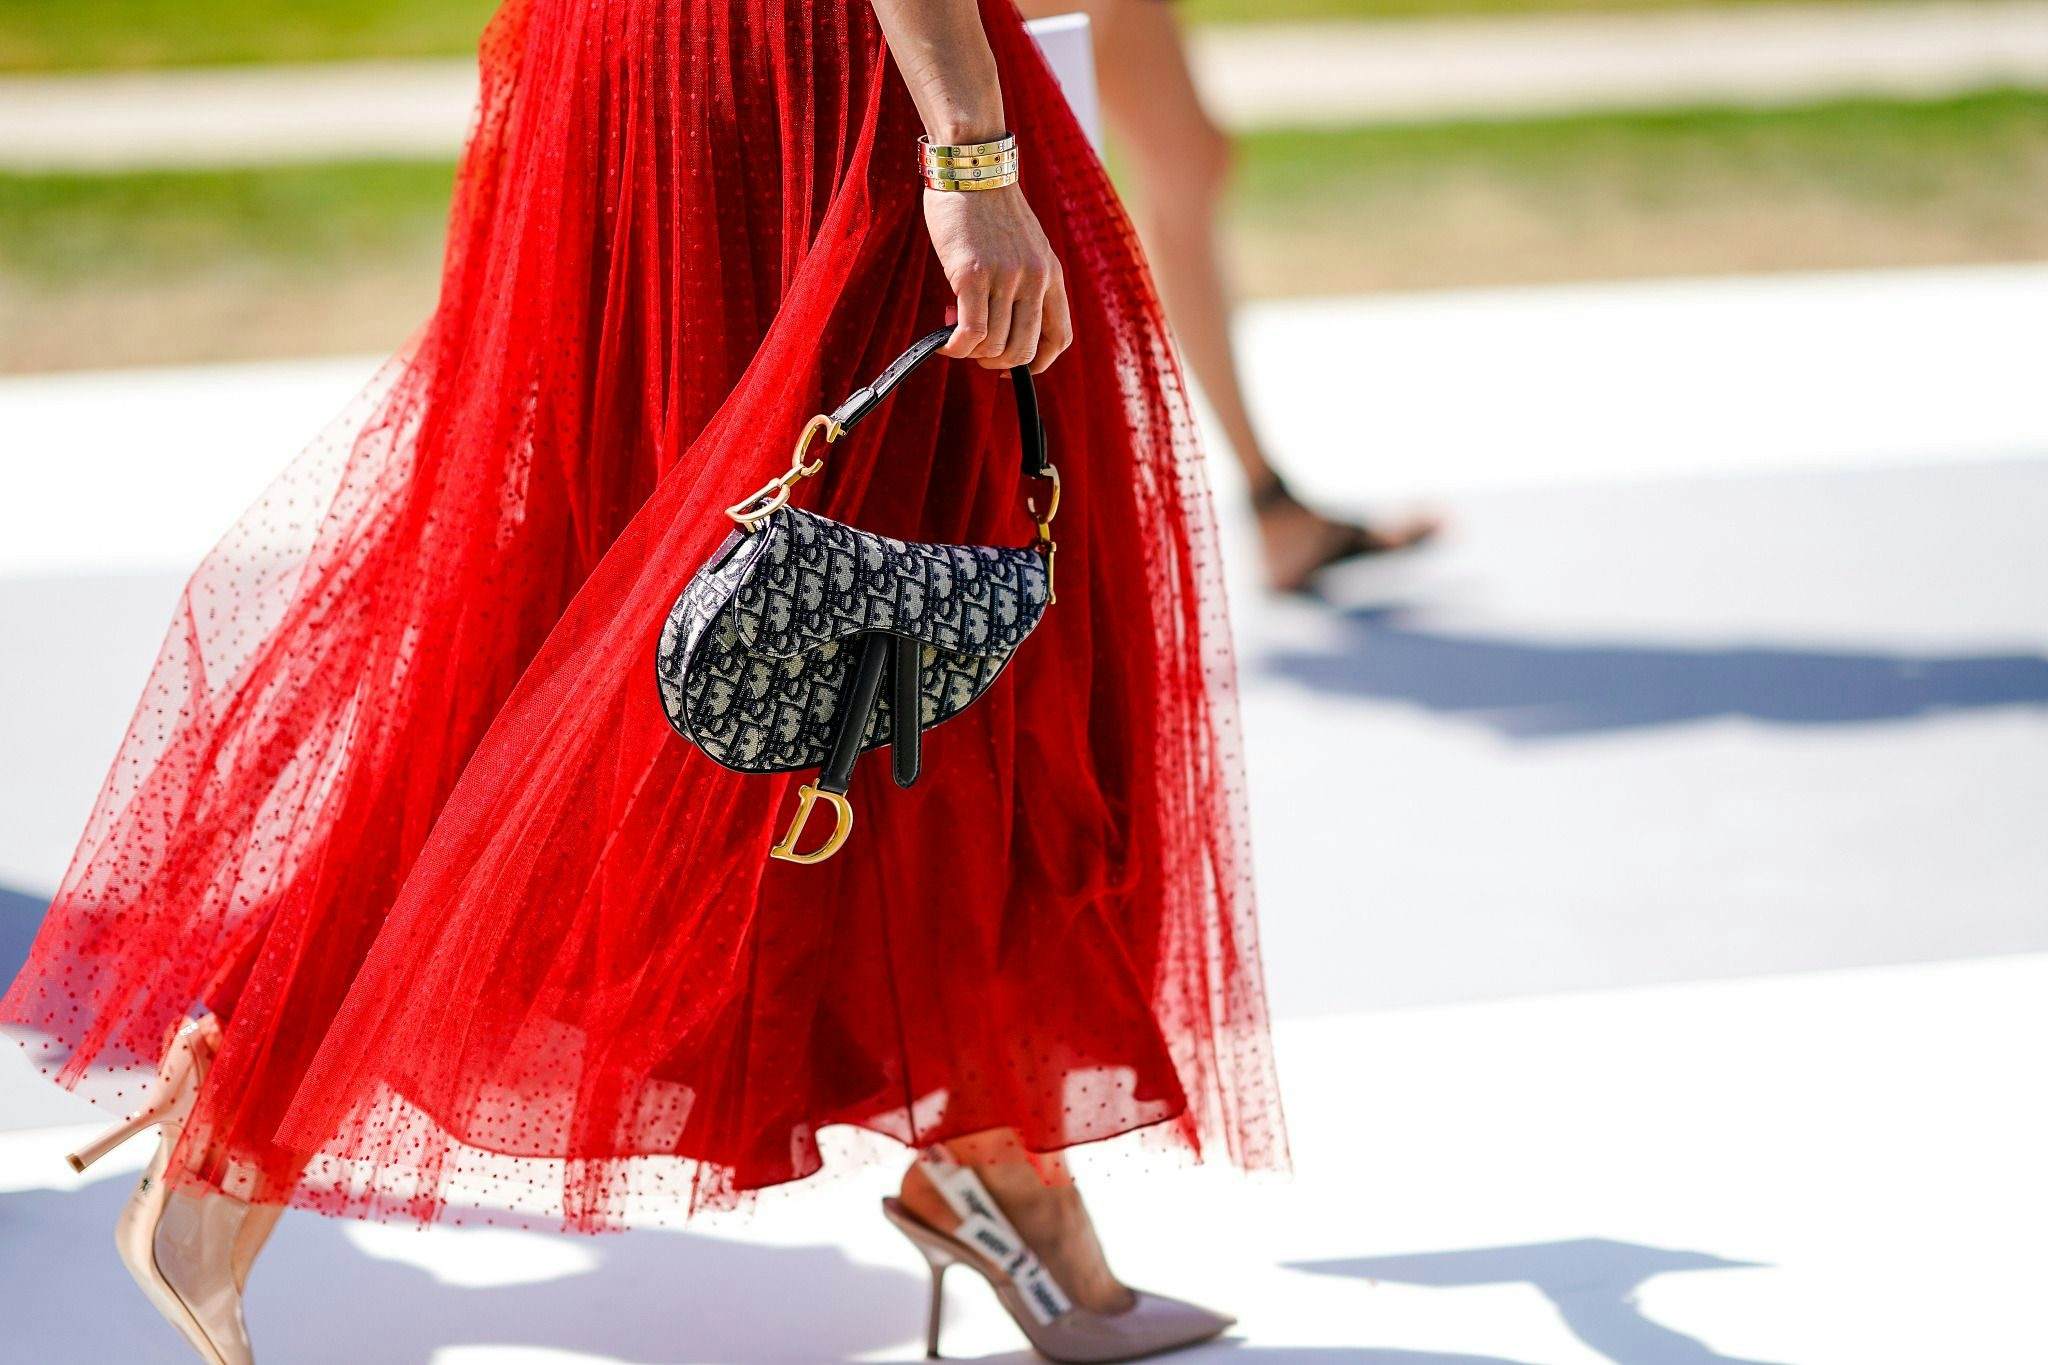 Dior's Pushy Relaunch of Iconic Bag Backfires in China